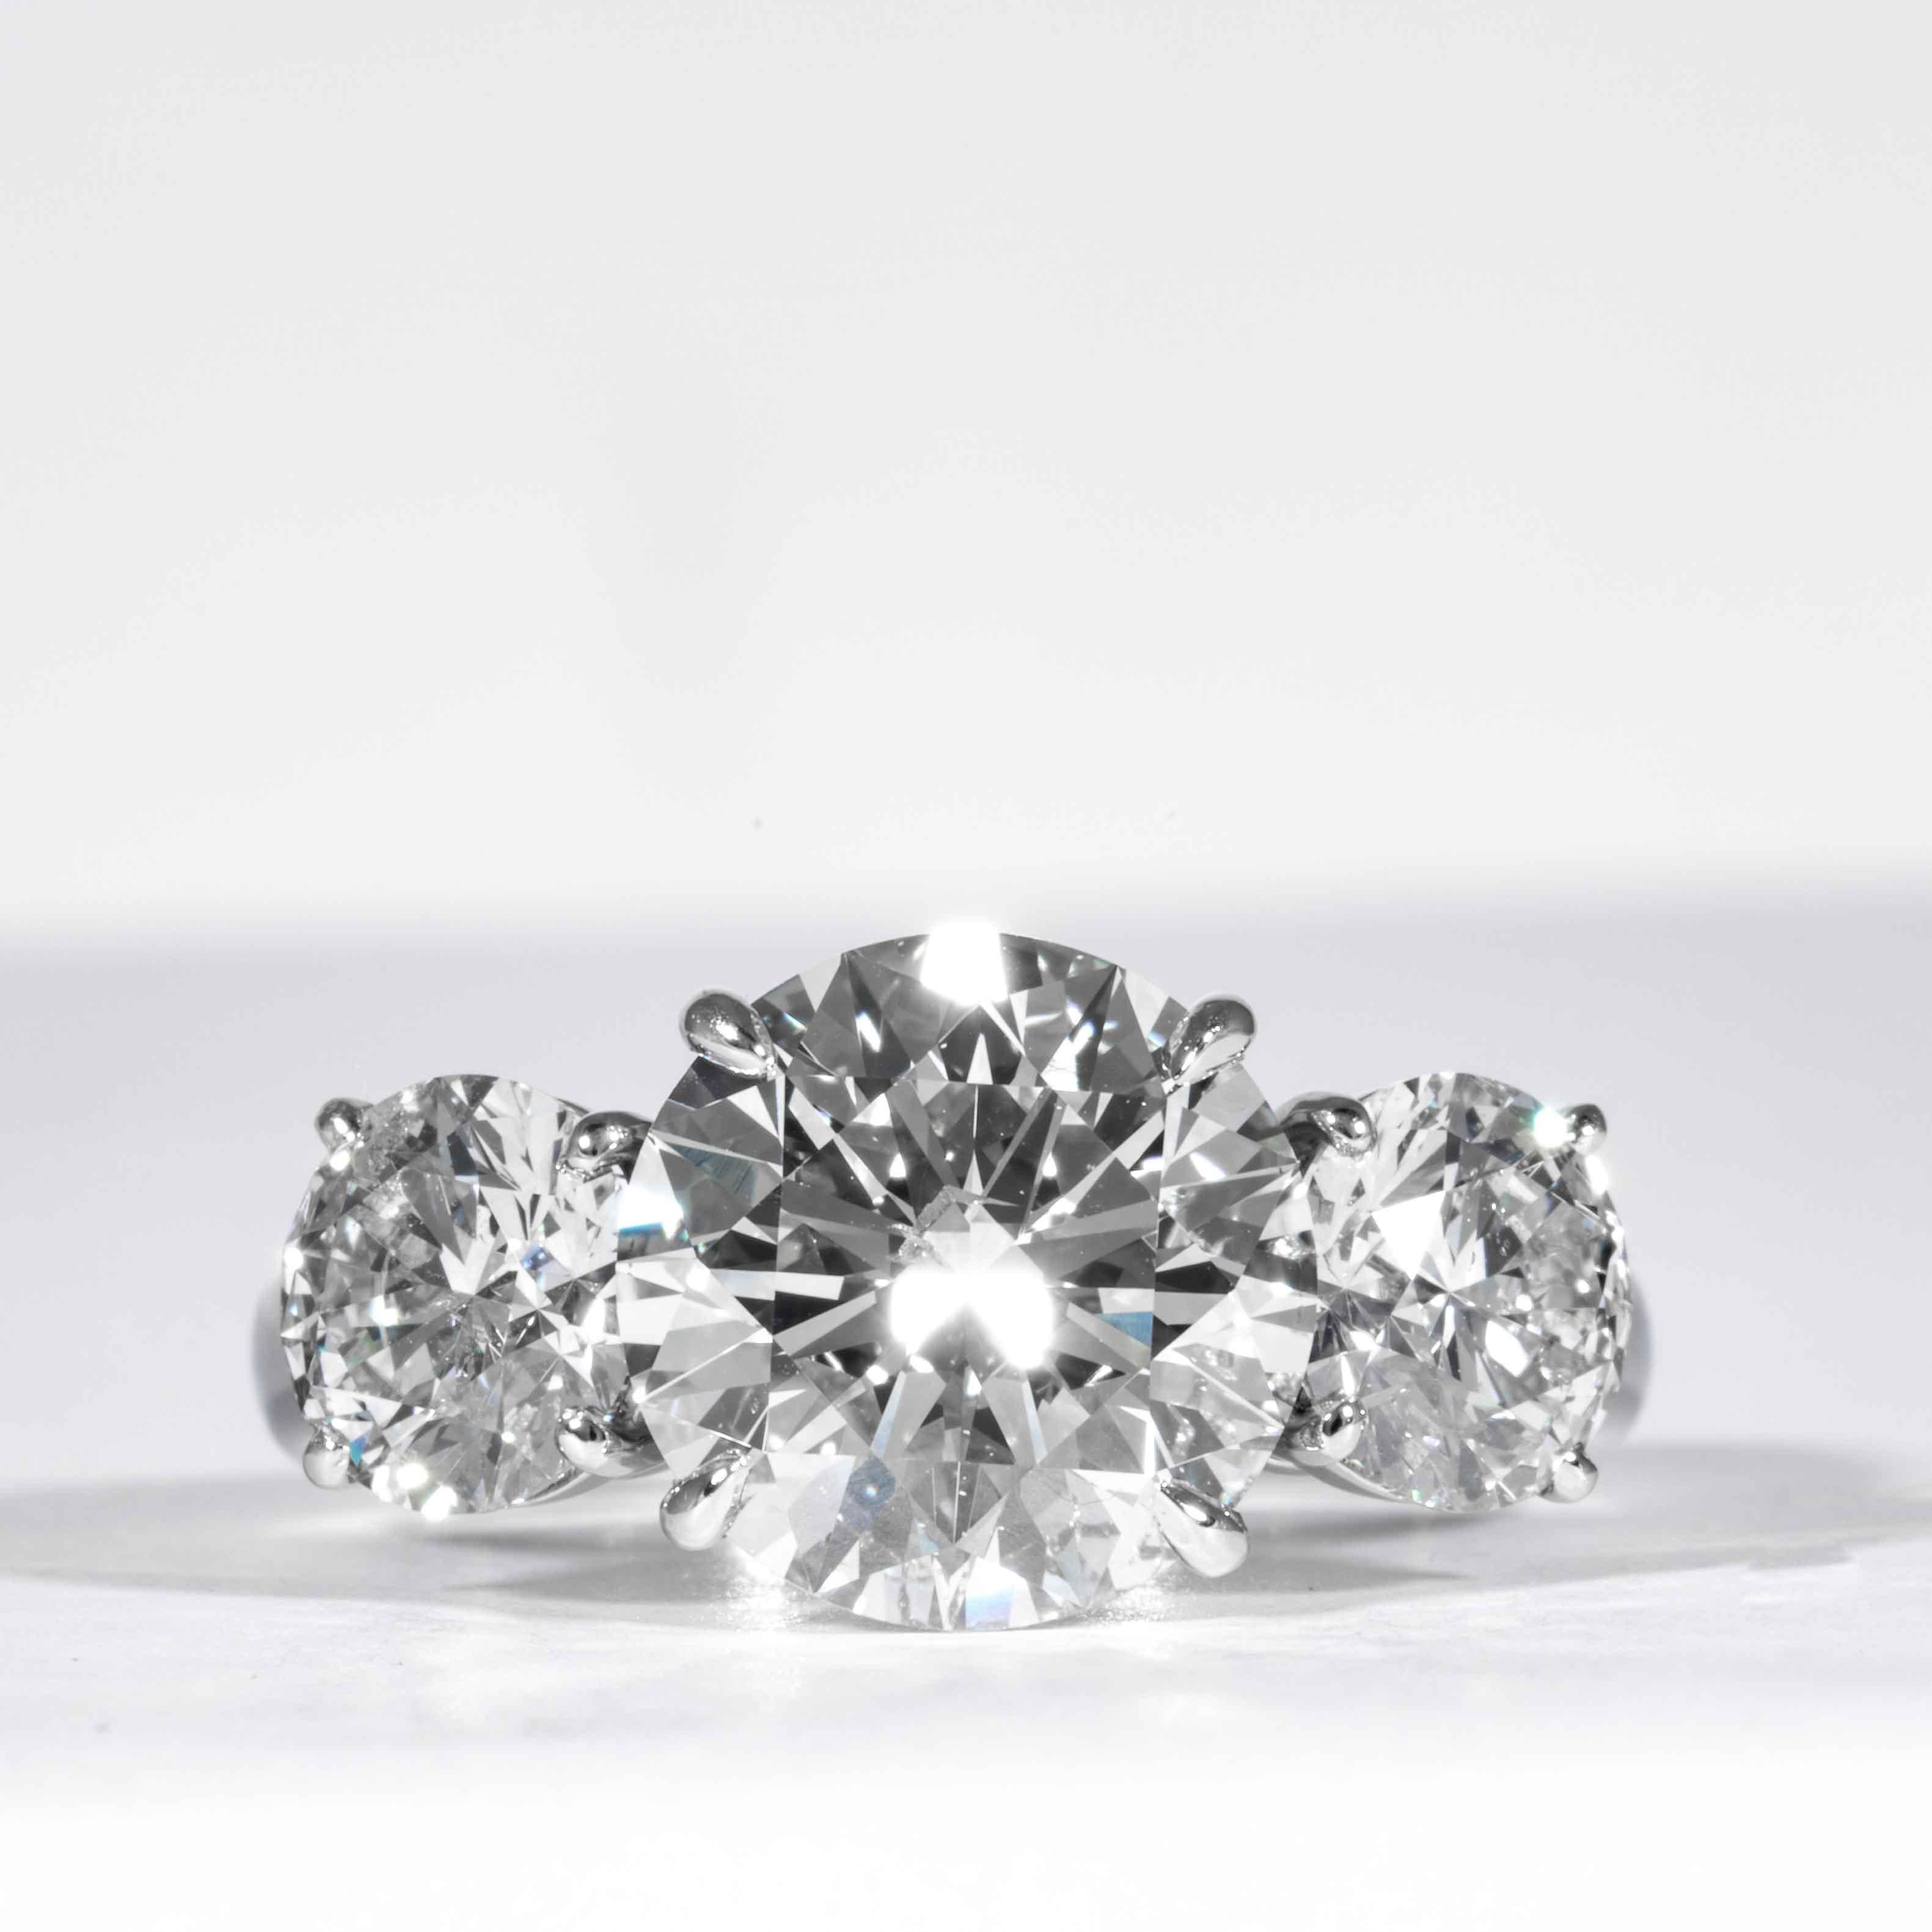 This elegant and classic diamond ring is offered by Shreve, Crump & Low. This 3.99 carat GIA Certified J SI1 round brilliant cut diamond measuring 10.17 - 10.20 x 6.25 mm is custom set in a handcrafted Shreve, Crump & Low platinum 3-stone ring. The